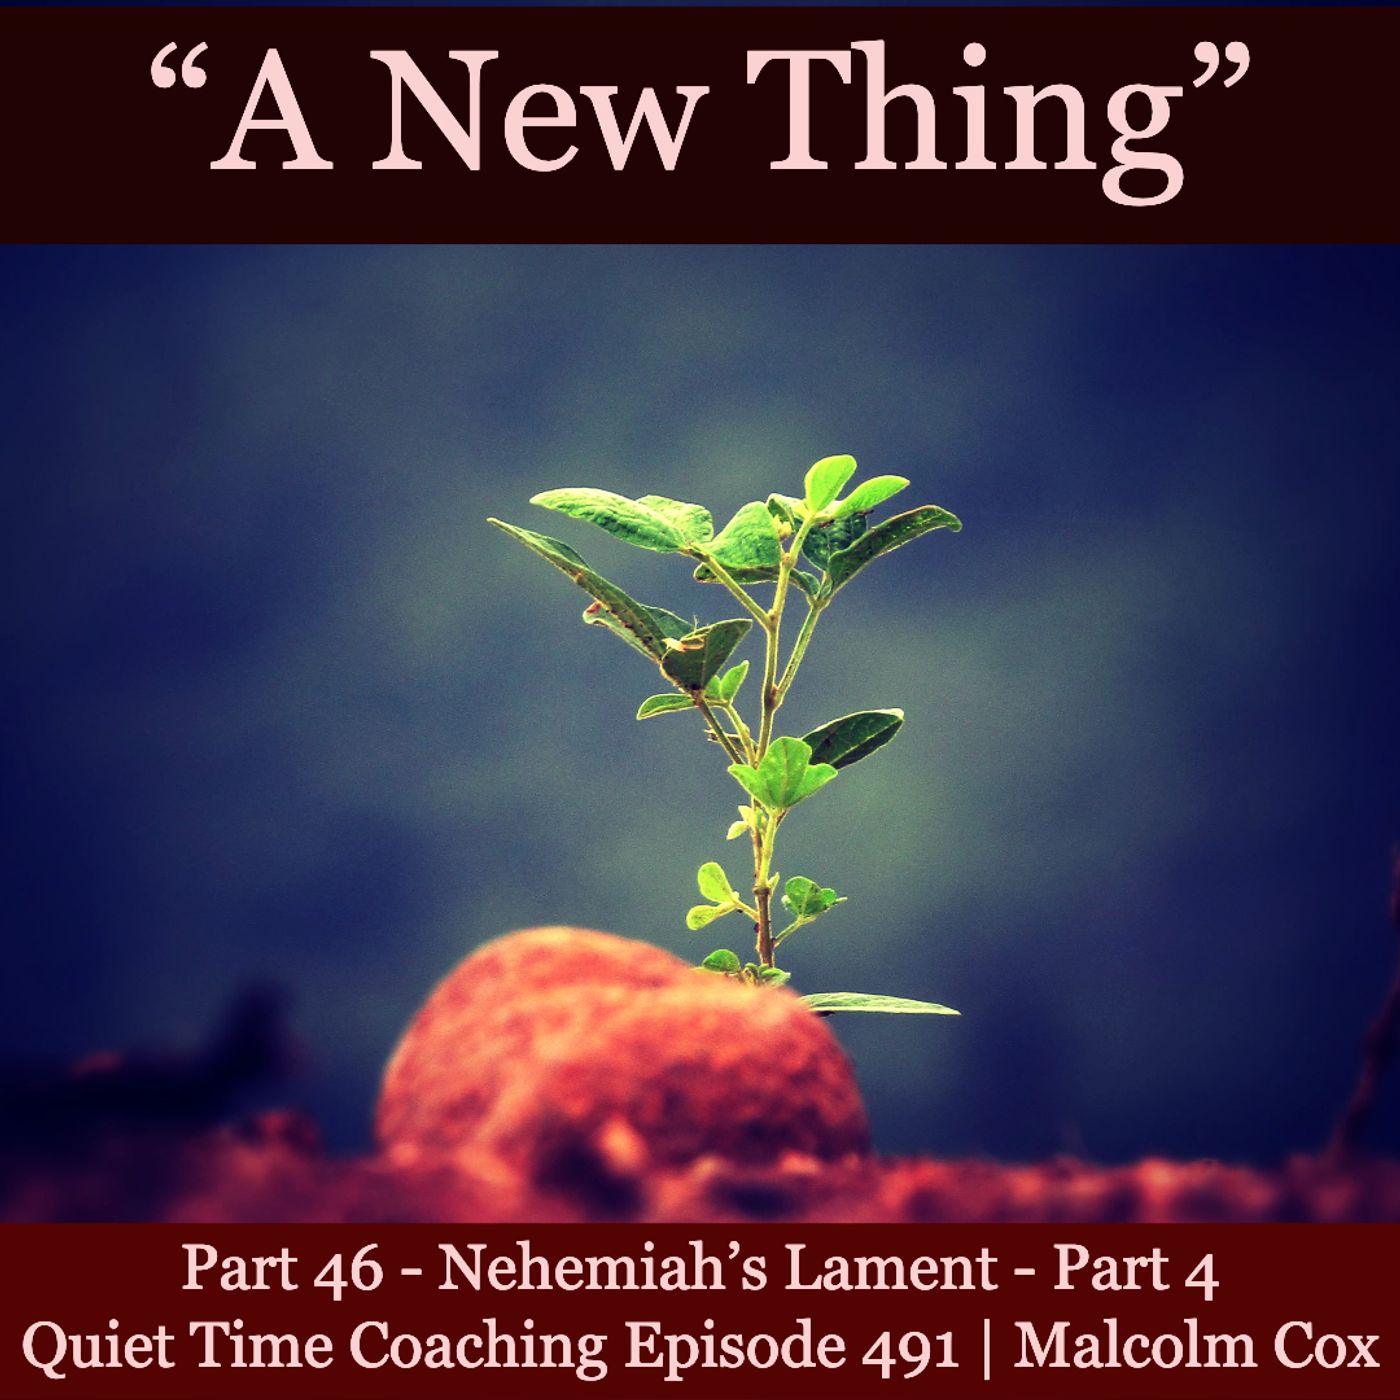 S2 Ep2166: Quiet Time Coaching Episode 491 | New Thing Series — Part 46 | “Nehemiah’s Lament - Part 4” | Malcolm Cox